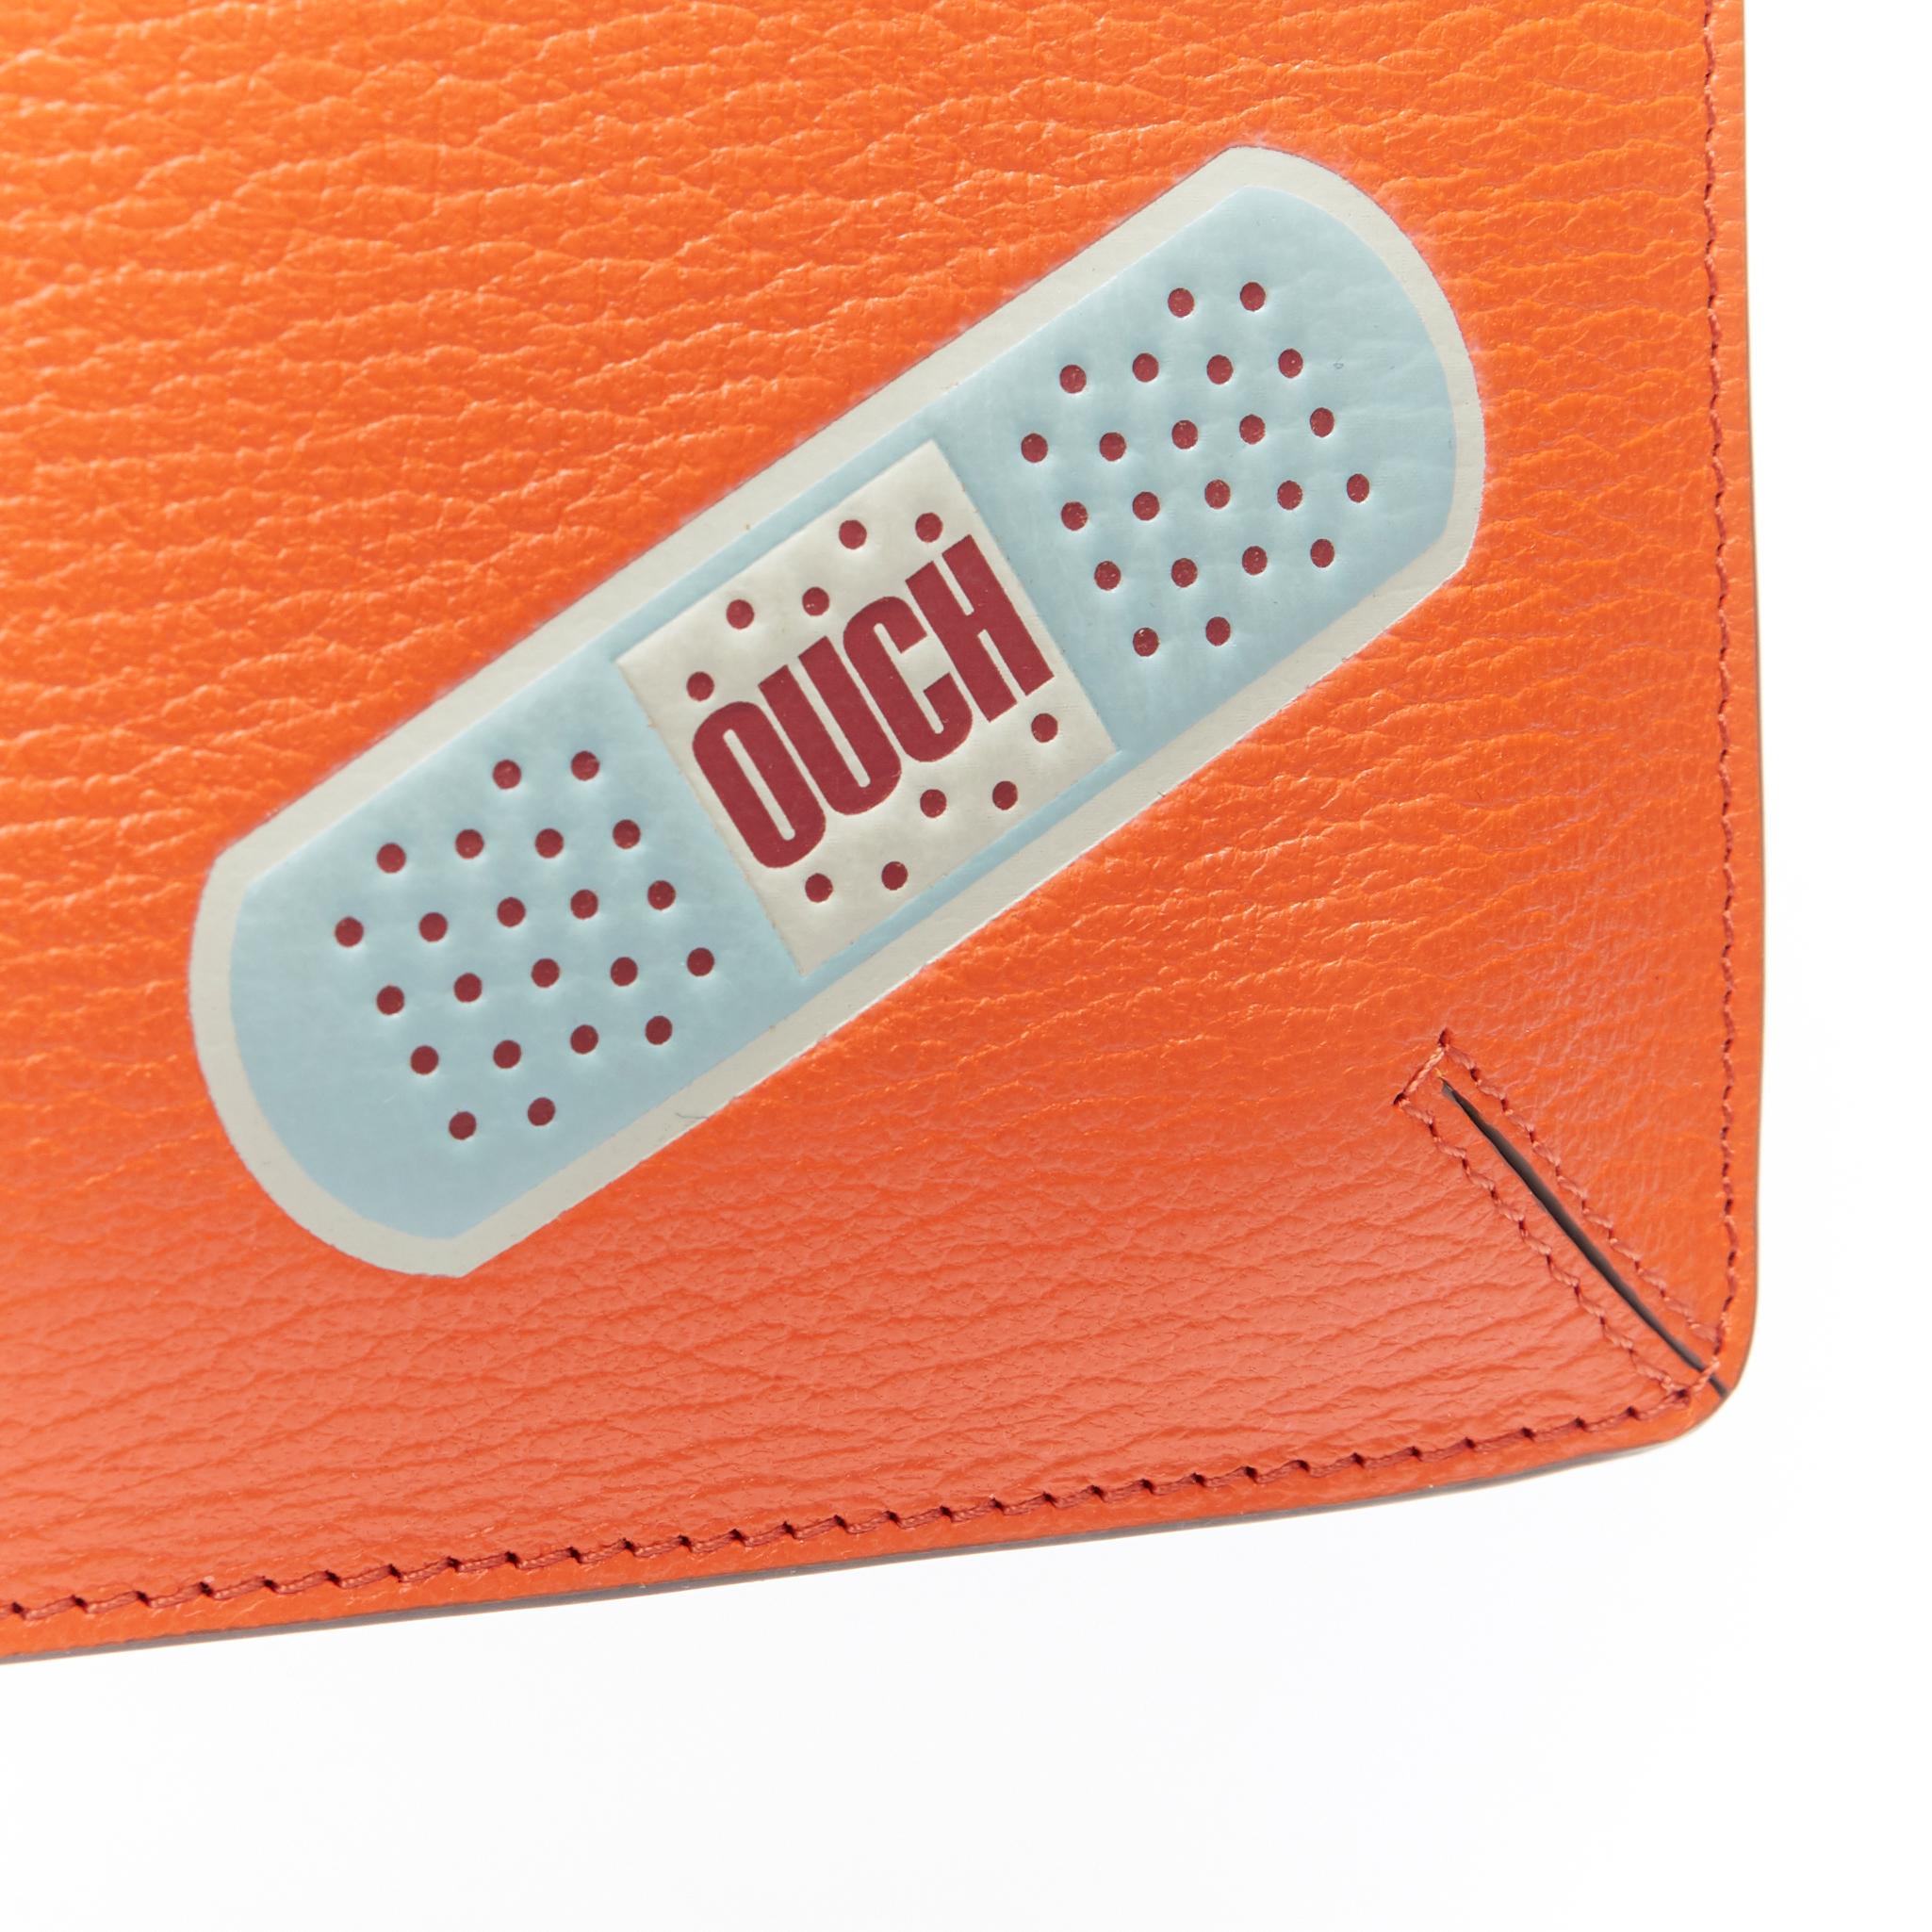 Orange new ANYA HINDMARCH Ouch bandage orange leather top tassel zip pouch bag